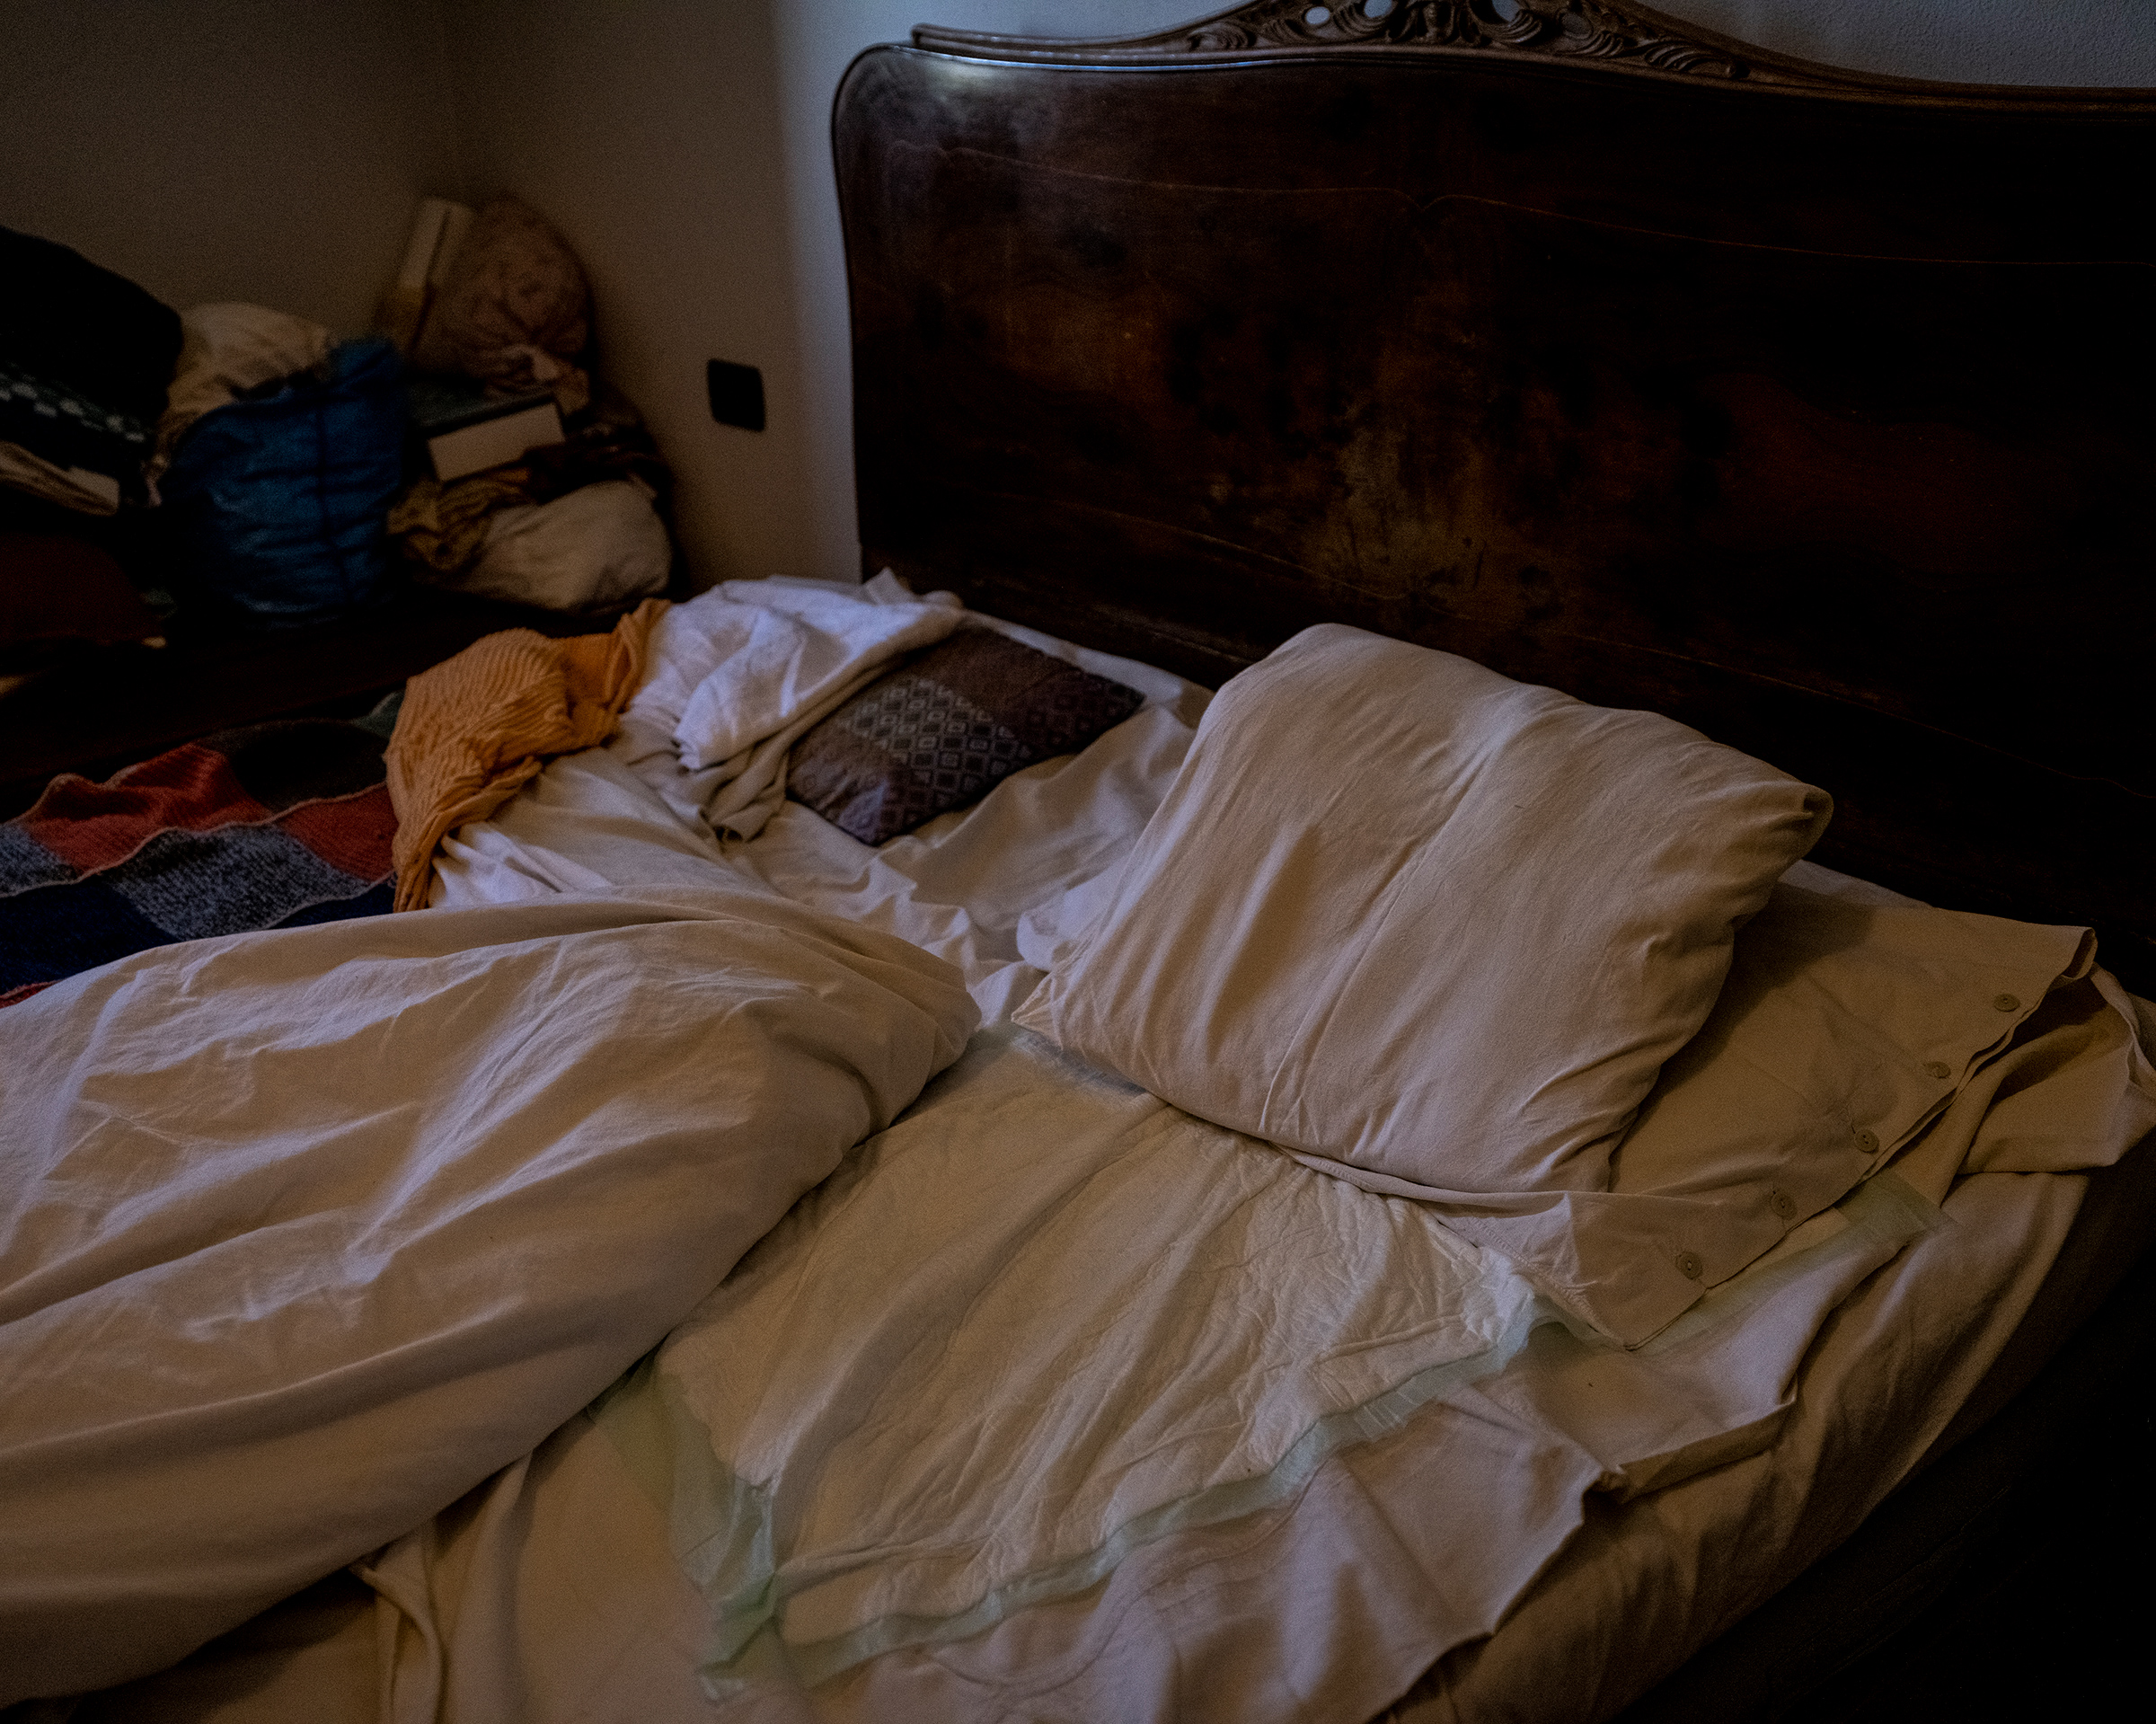 The empty bed of an elderly woman who was taken to the hospital for COVID-19 symptoms in Rossia, southeast of Milan.